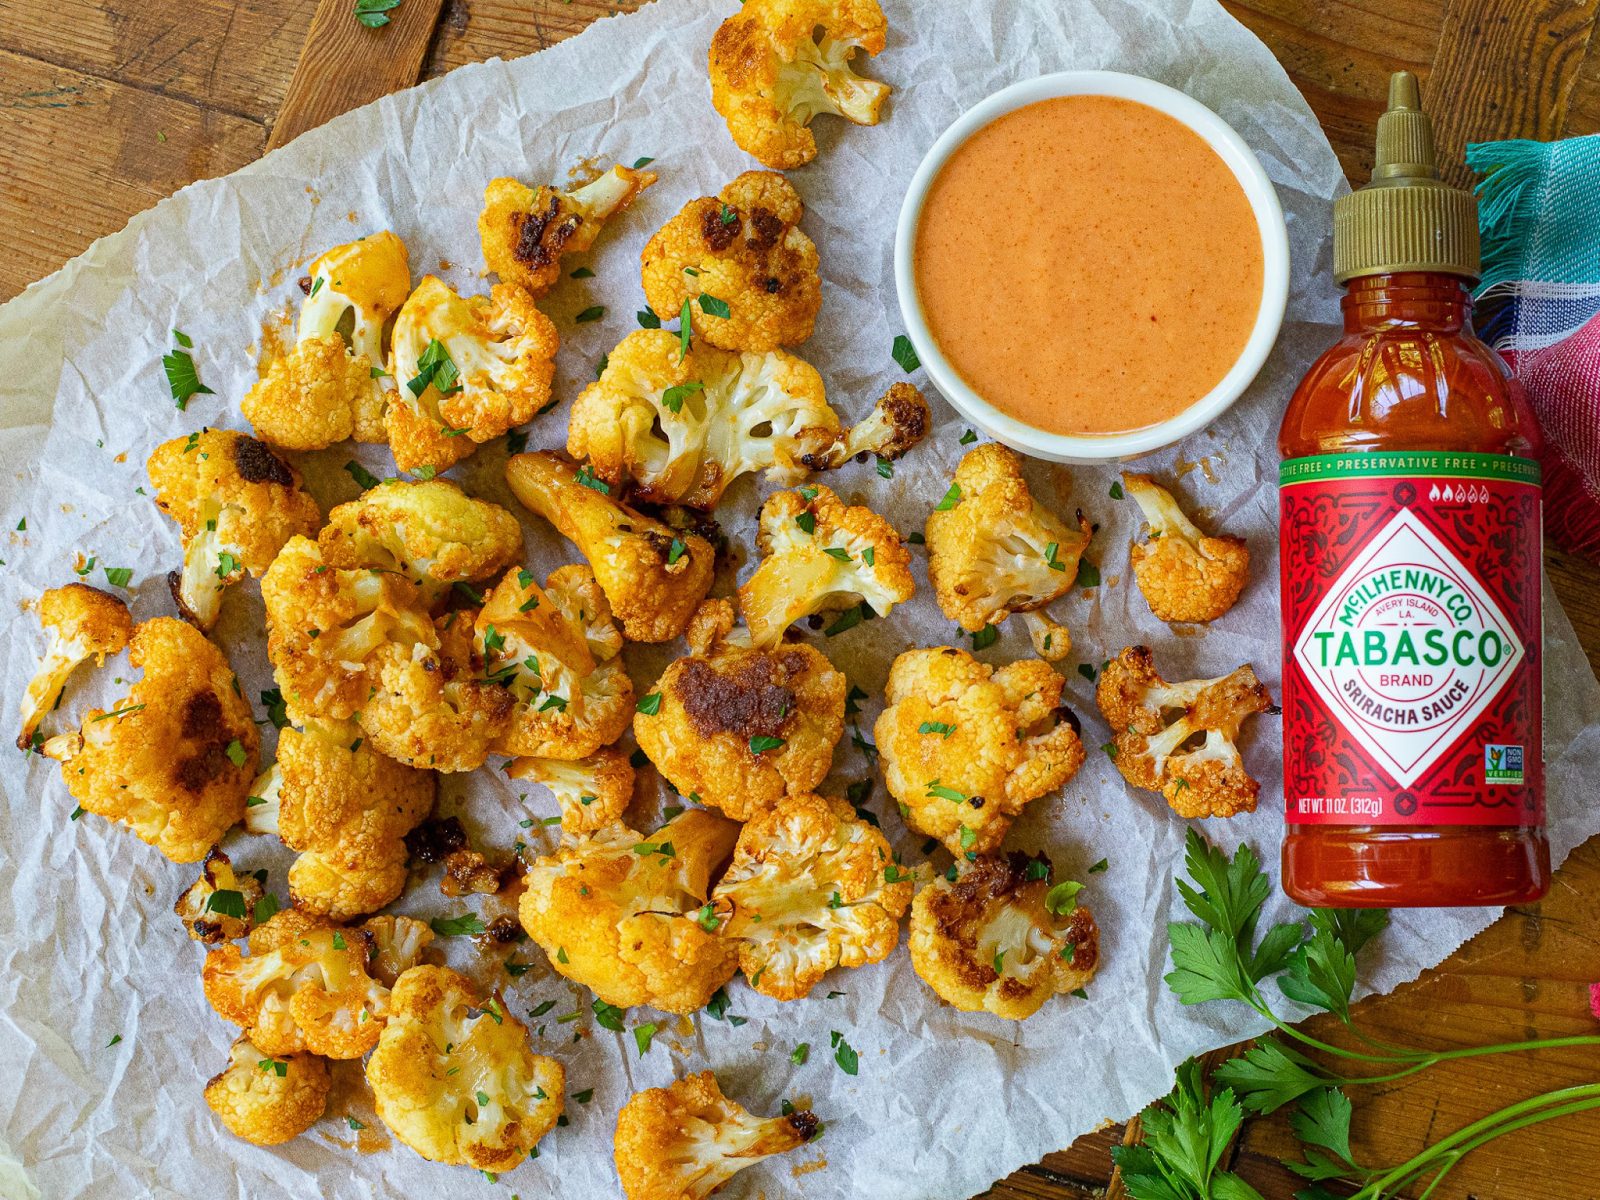 Add A Kick Of Flavor To Mealtime With TABASCO® Brand Pepper Sauces – BOGO This Week At Publix